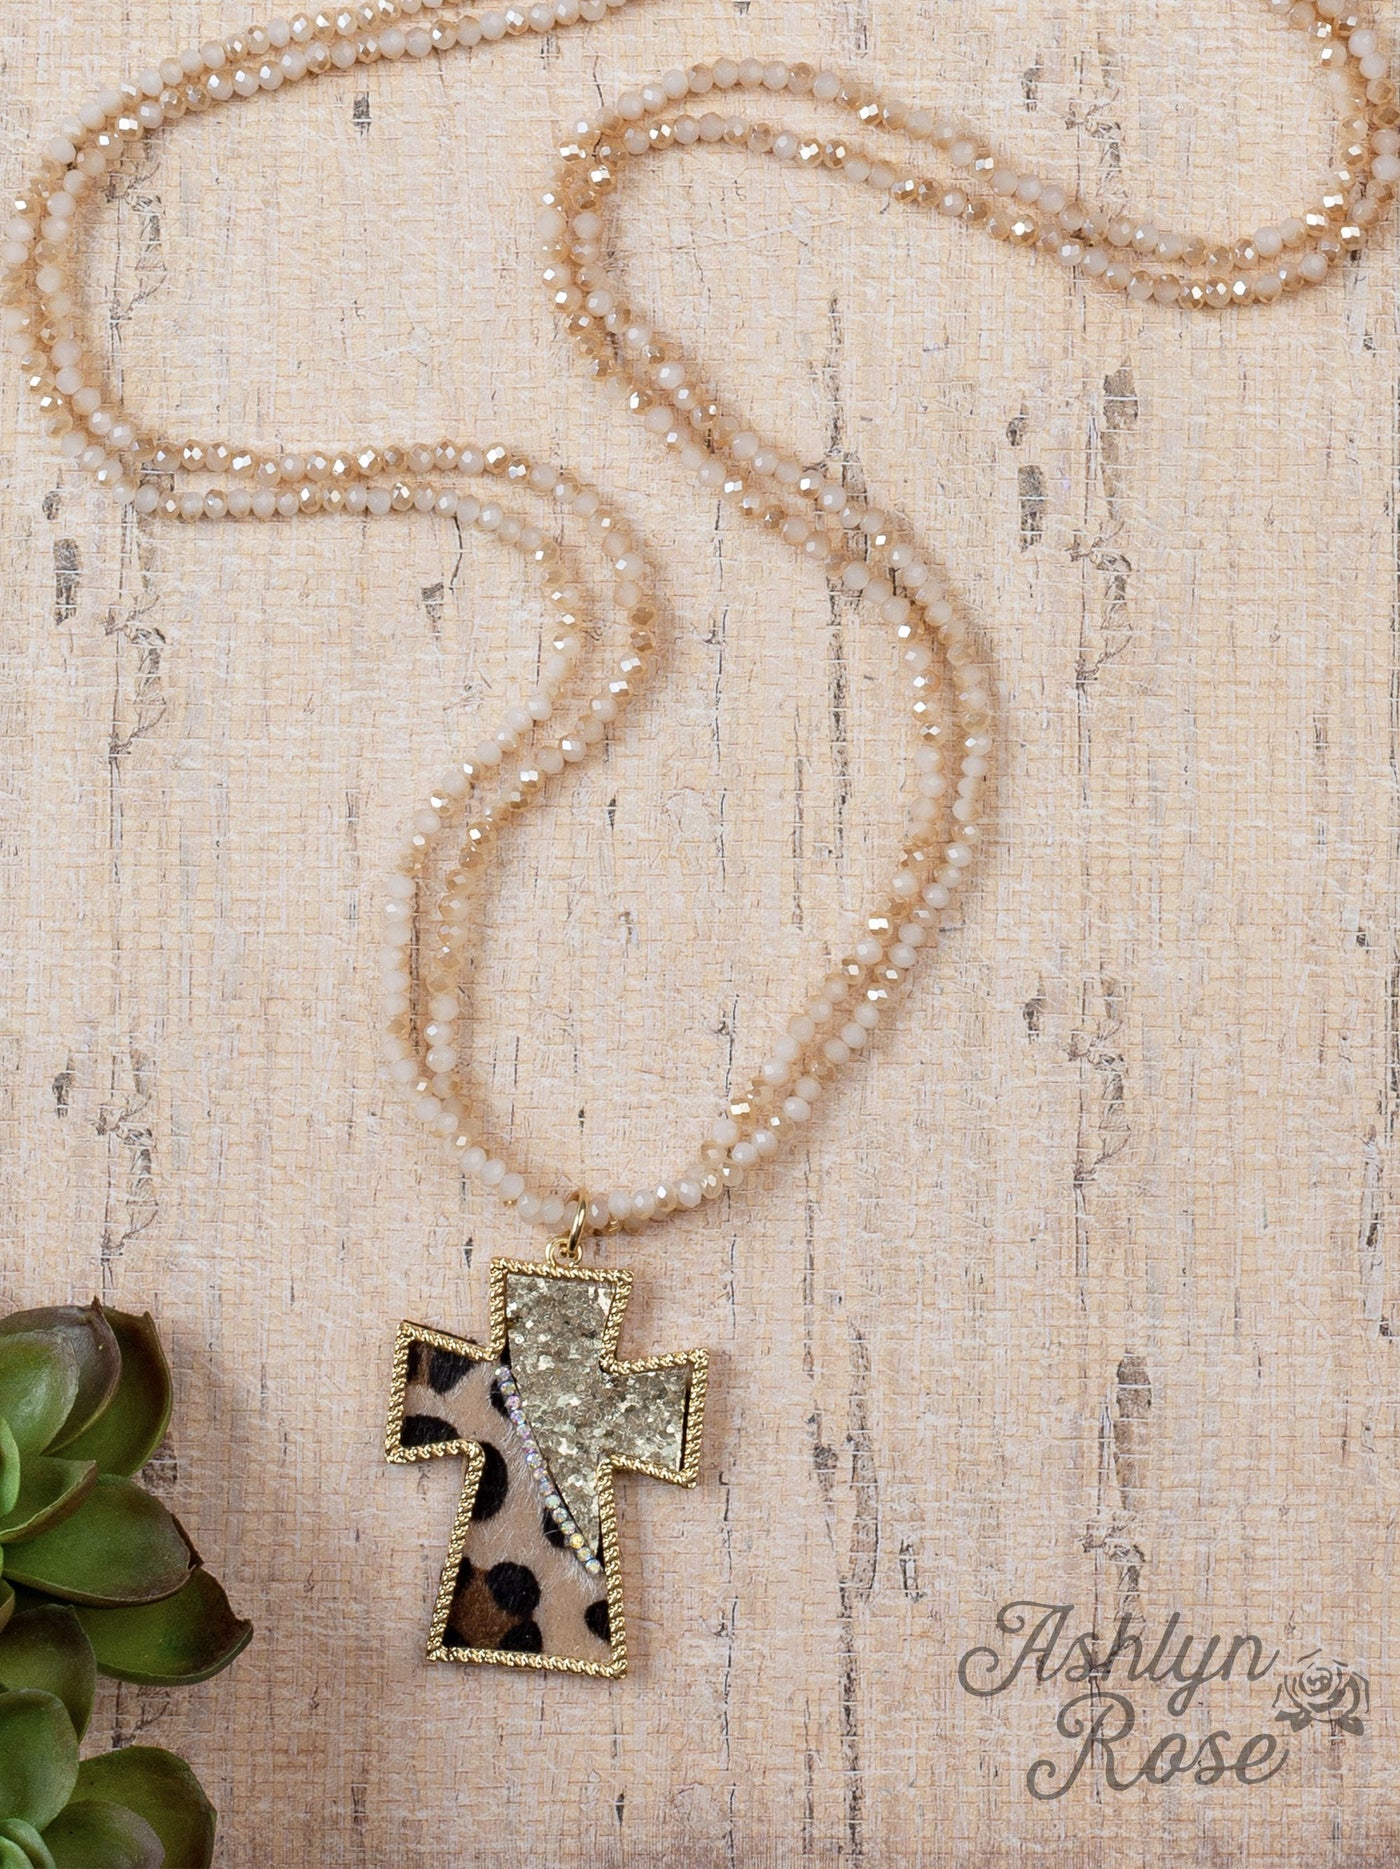 You Can't Cross Me Double Beaded Necklace With A Gold and Sequence Leopard Hide Cross Pendant, Beige